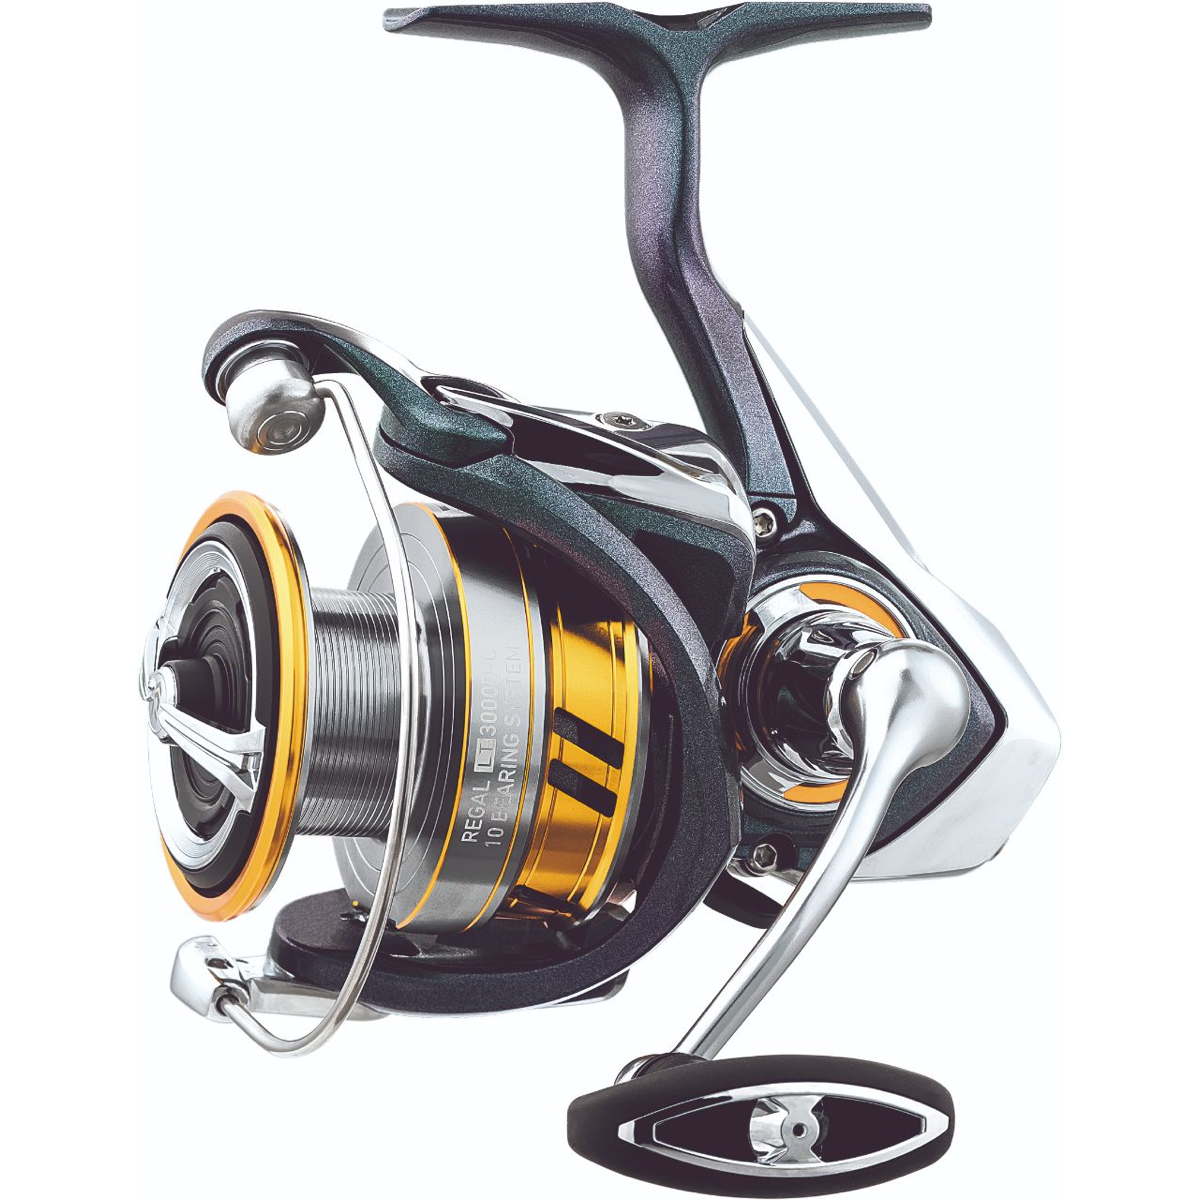 Photo of Daiwa Regal LT Spinning Reel for sale at United Tackle Shops.